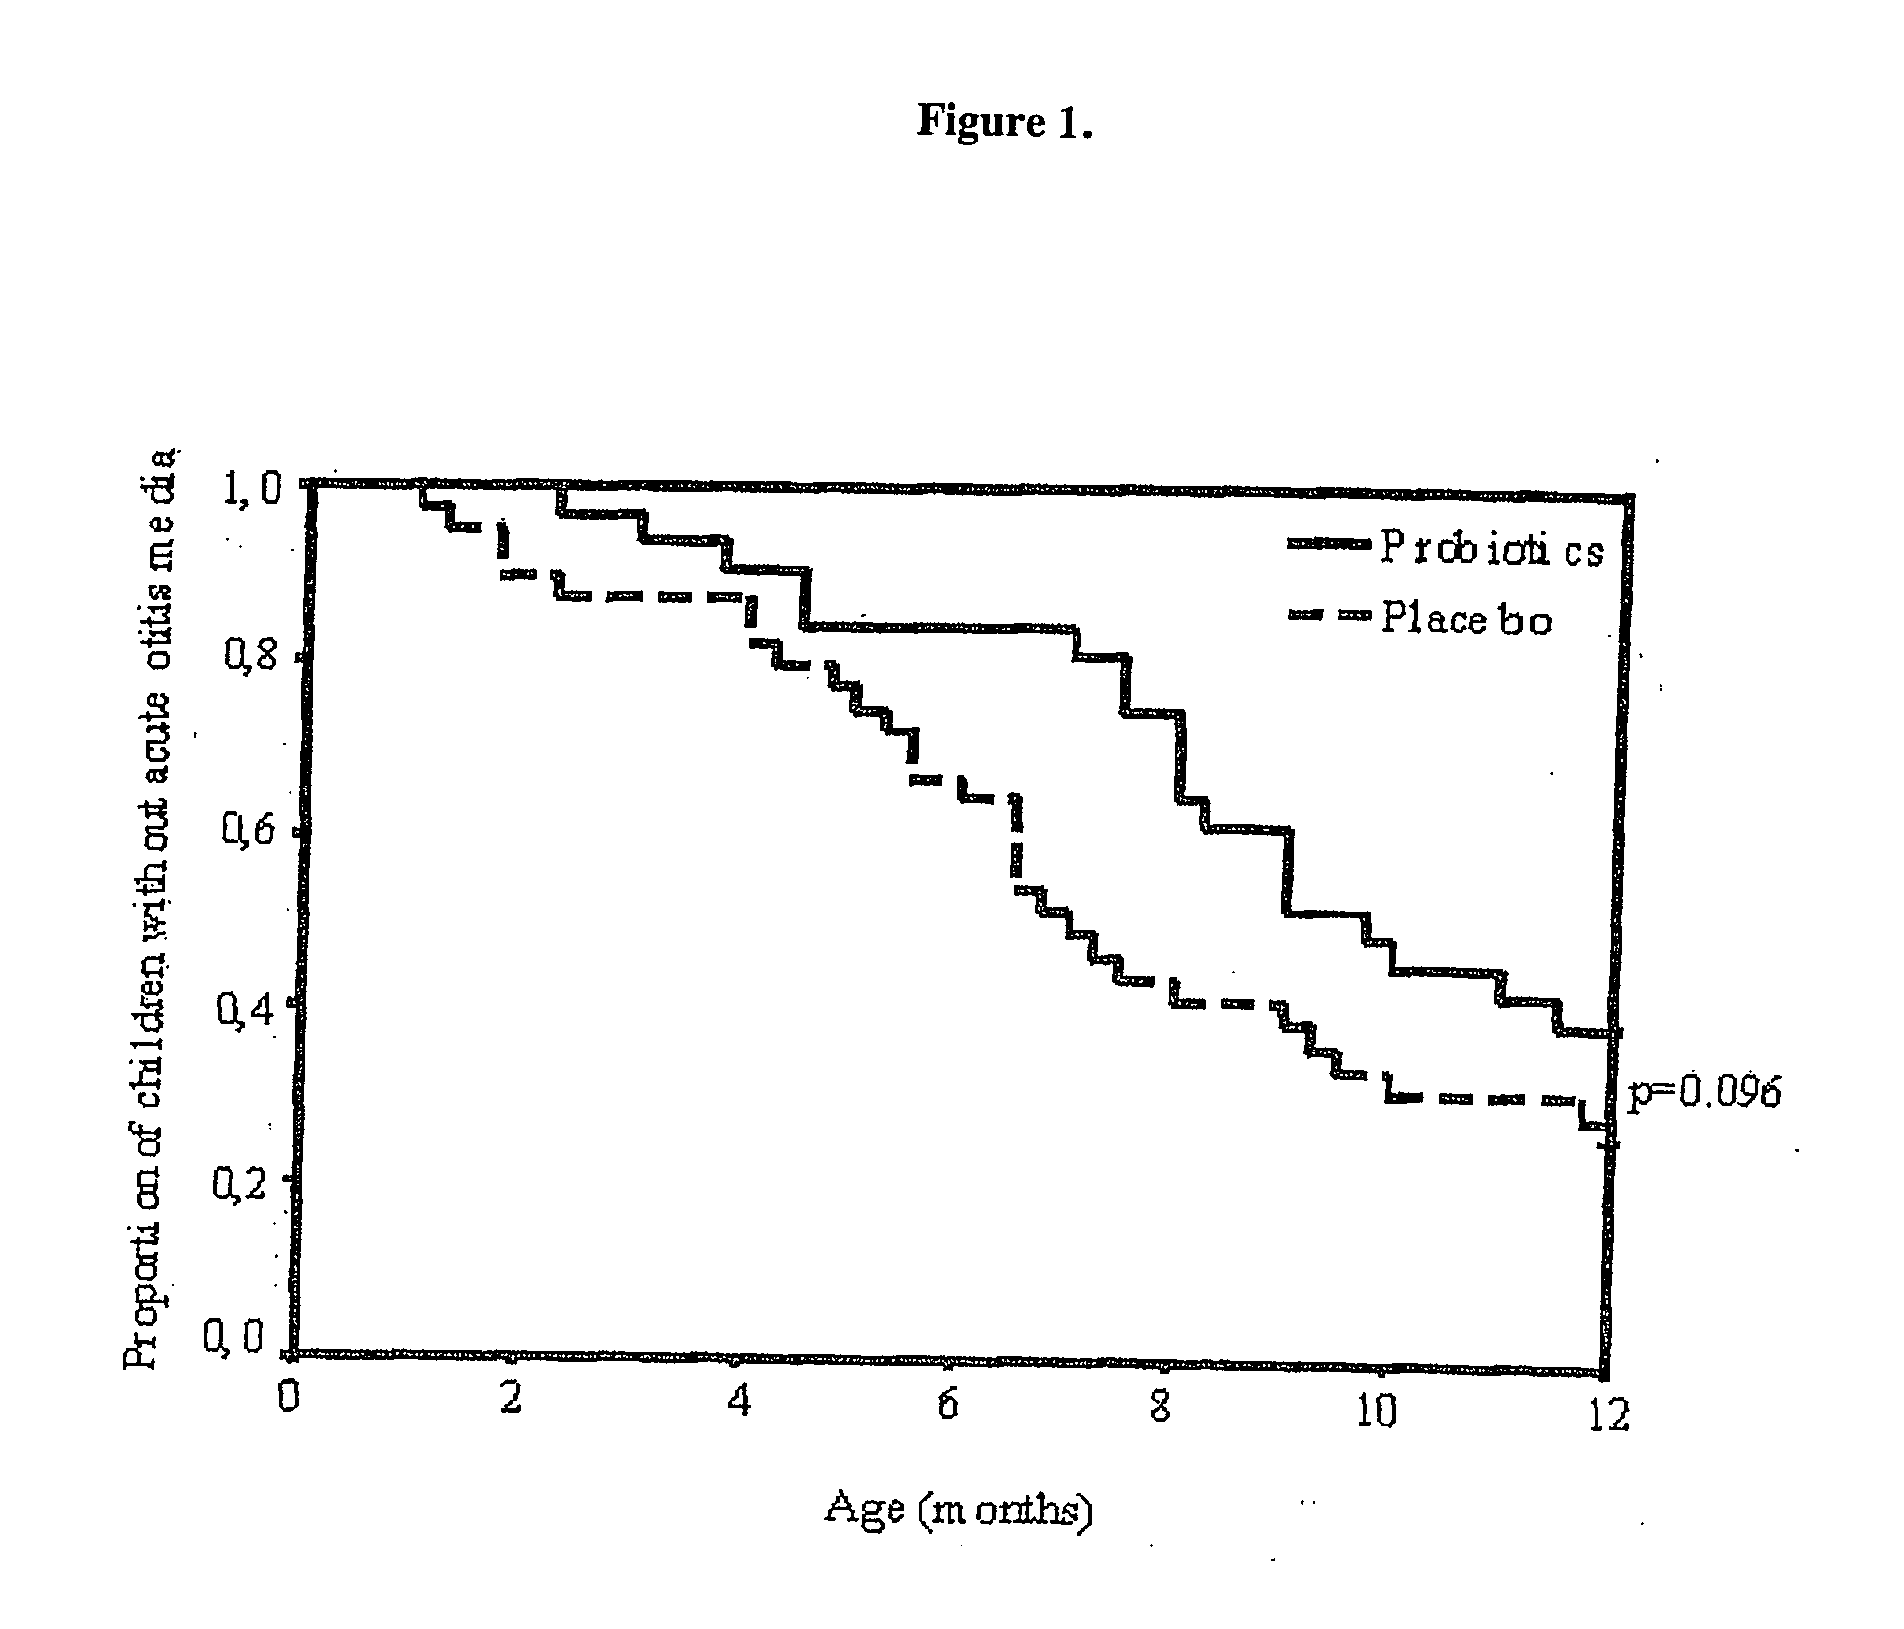 Method for preventing or treating respiratory infections and acute otitis media in infants